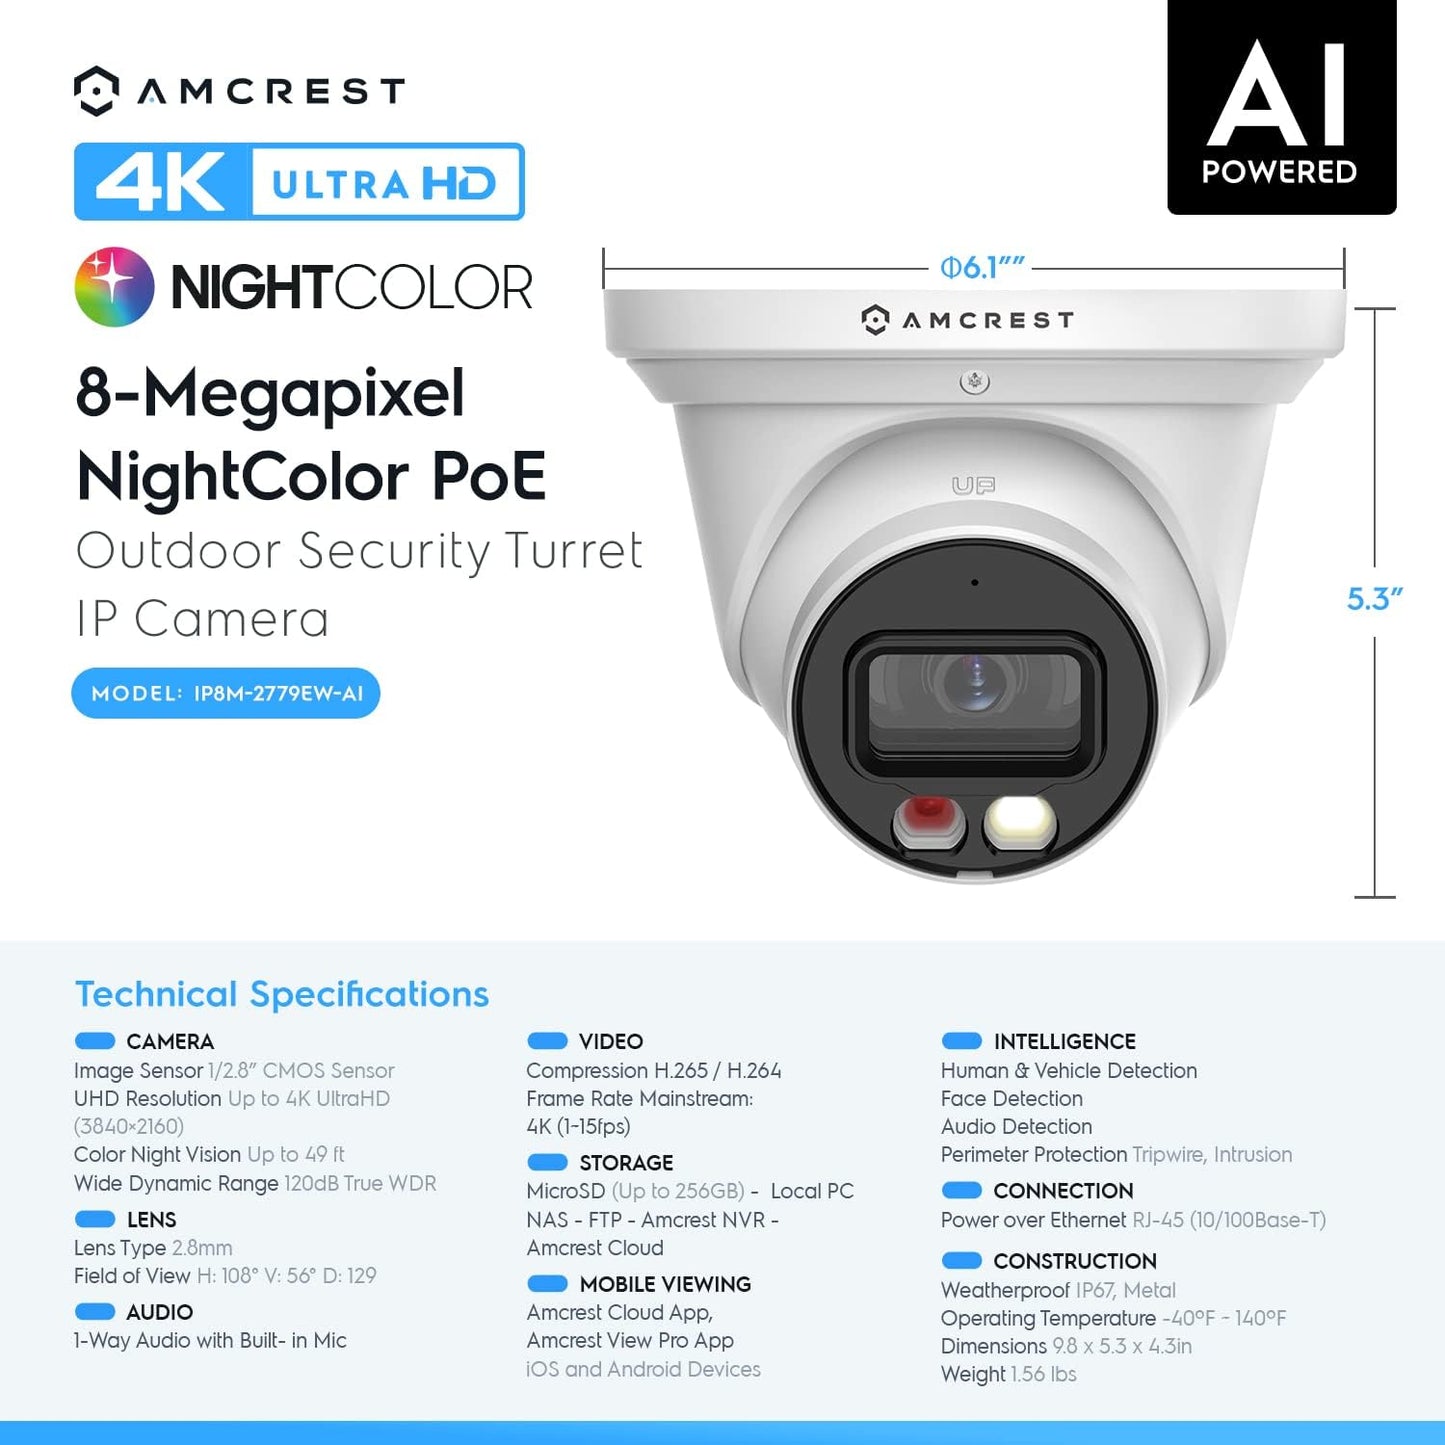 Amcrest 2-Pack UltraHD 4K (8MP) IP PoE AI Camera, 49ft Nightcolor, Security Outdoor Turret Camera, Built-in Mic, Human Detection, Active Deterrent, 129 FOV, 4K@15fps